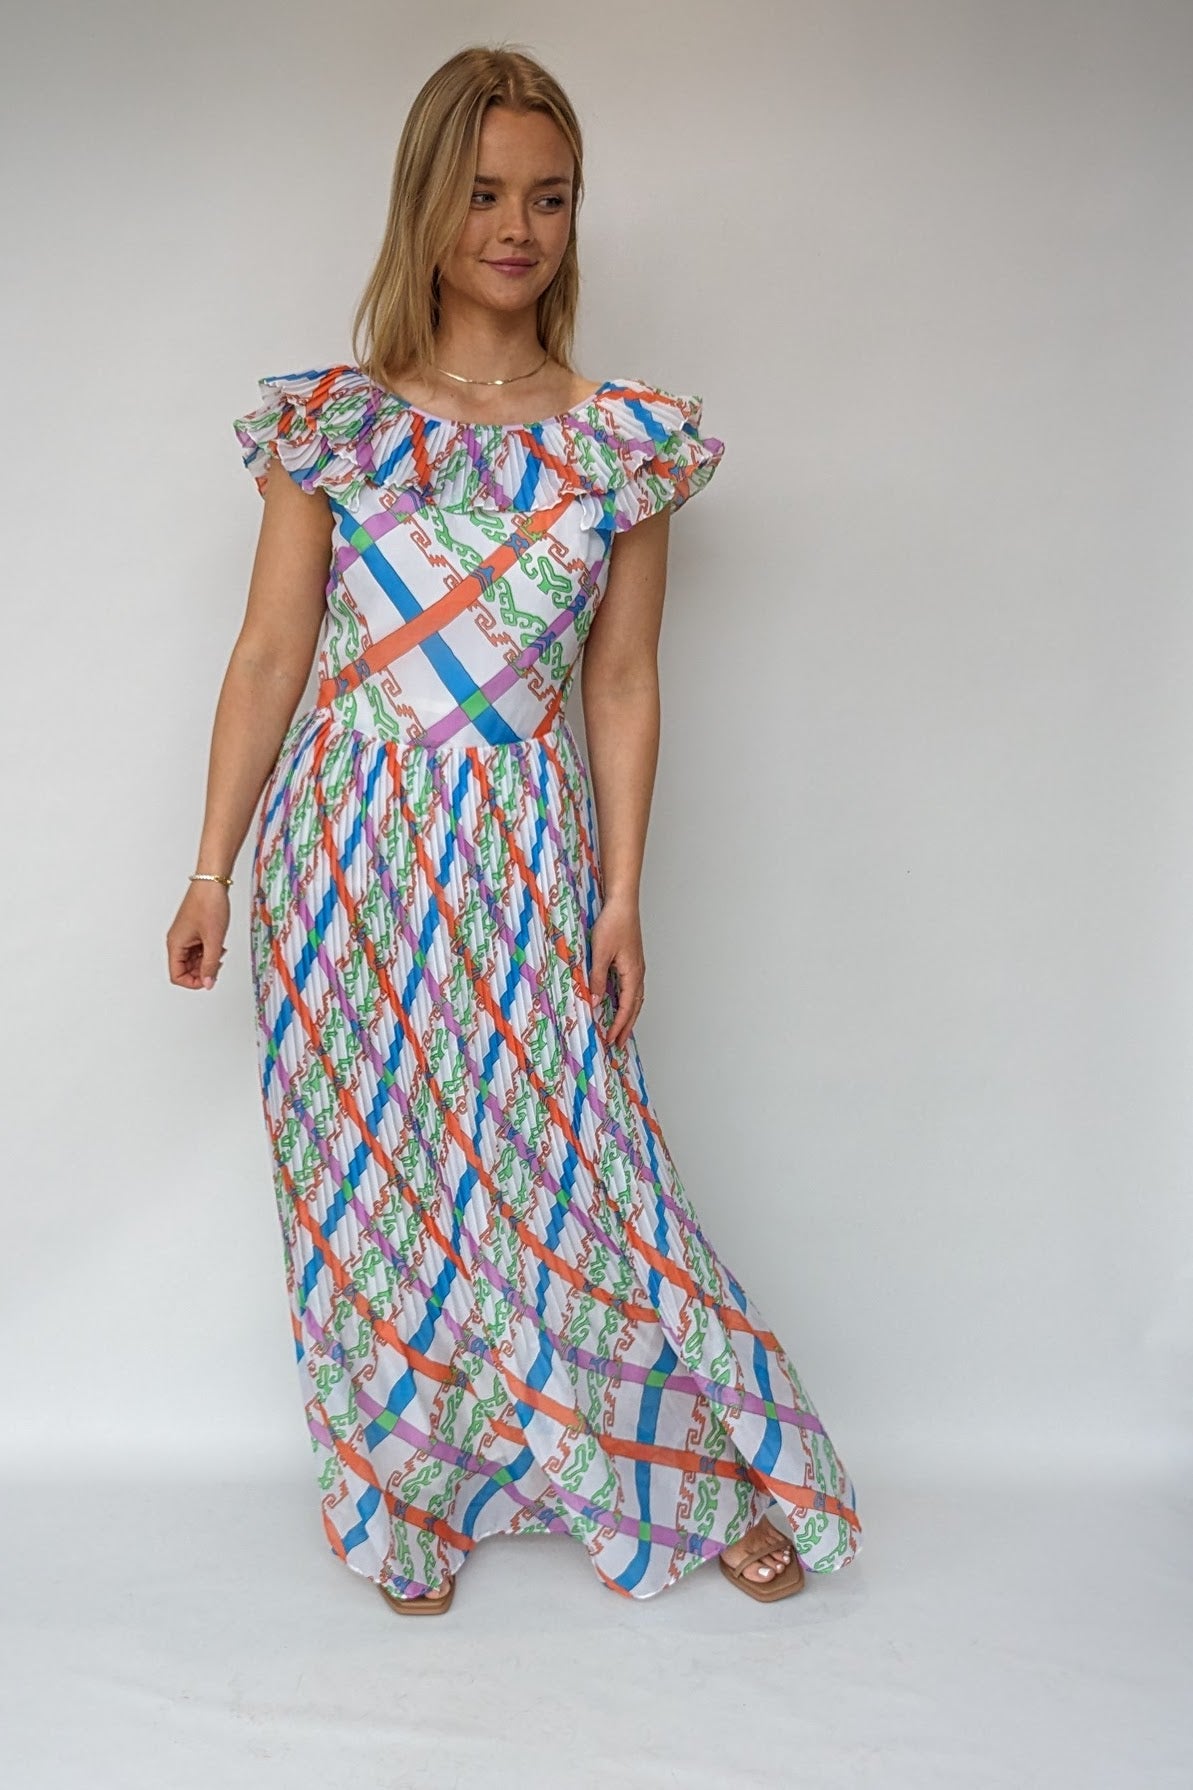 vintage 1970s maxi dress with bold pattern of orange, green, blue and purple with frill neckline